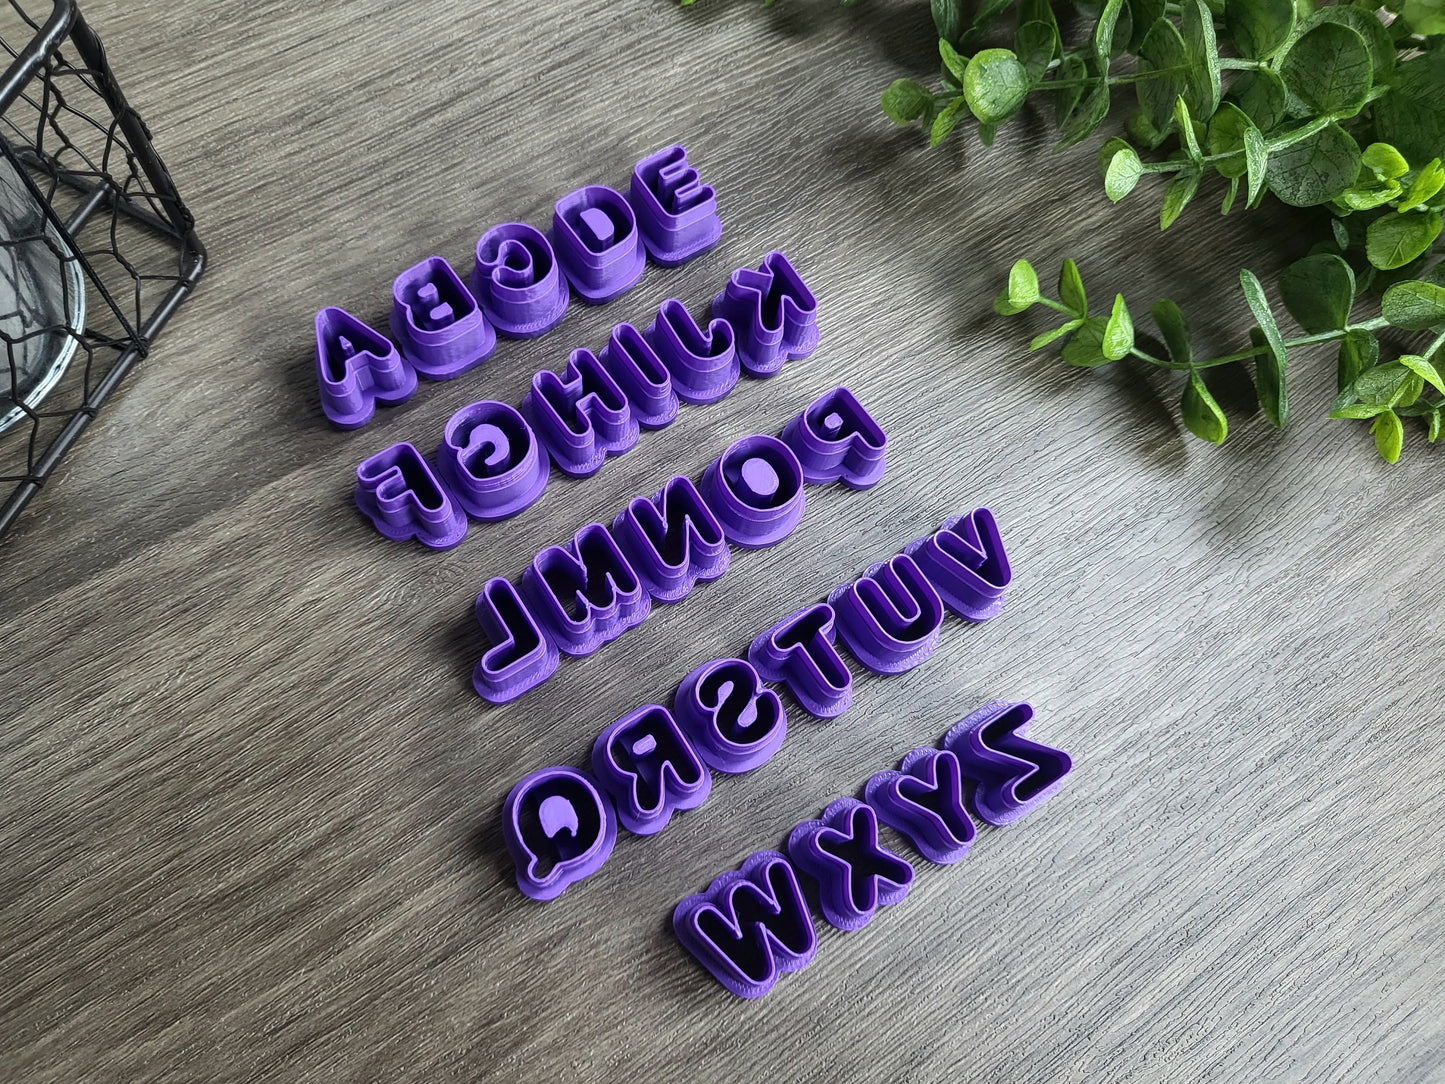 Rounded Alphabet Clay Cutter Set, Polymer Clay Cutter, Letter Clay Cutters